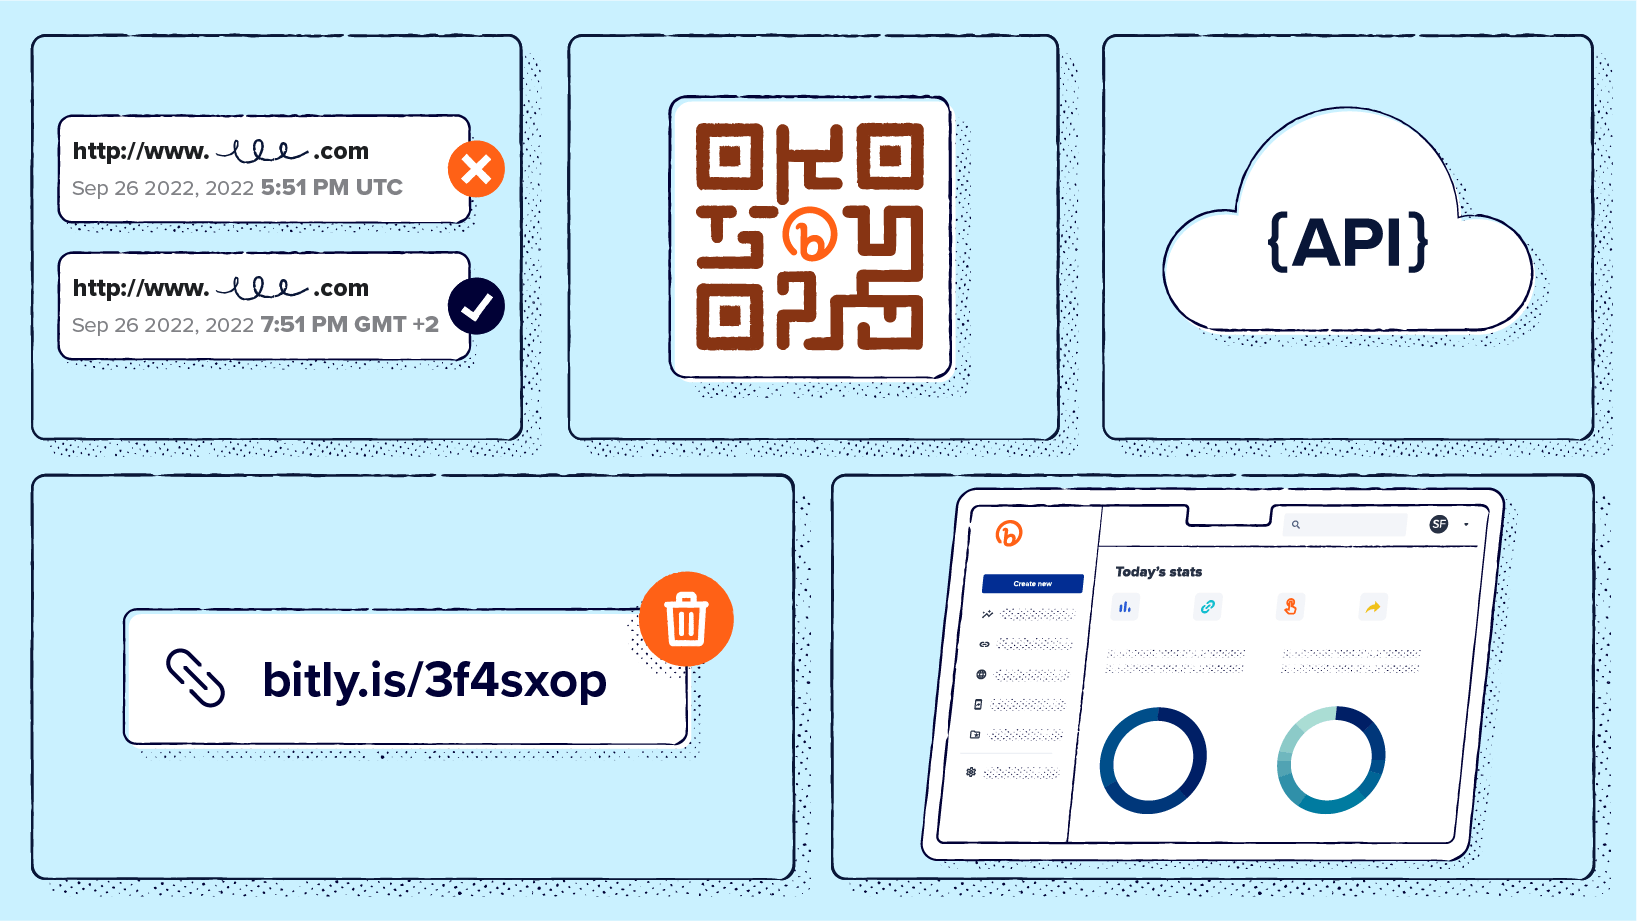 A graphic showing the difference between UTC and local time, a Bitly QR Code, a cloud with the word API, the ability to delete links, and the Bitly Connections Platform.